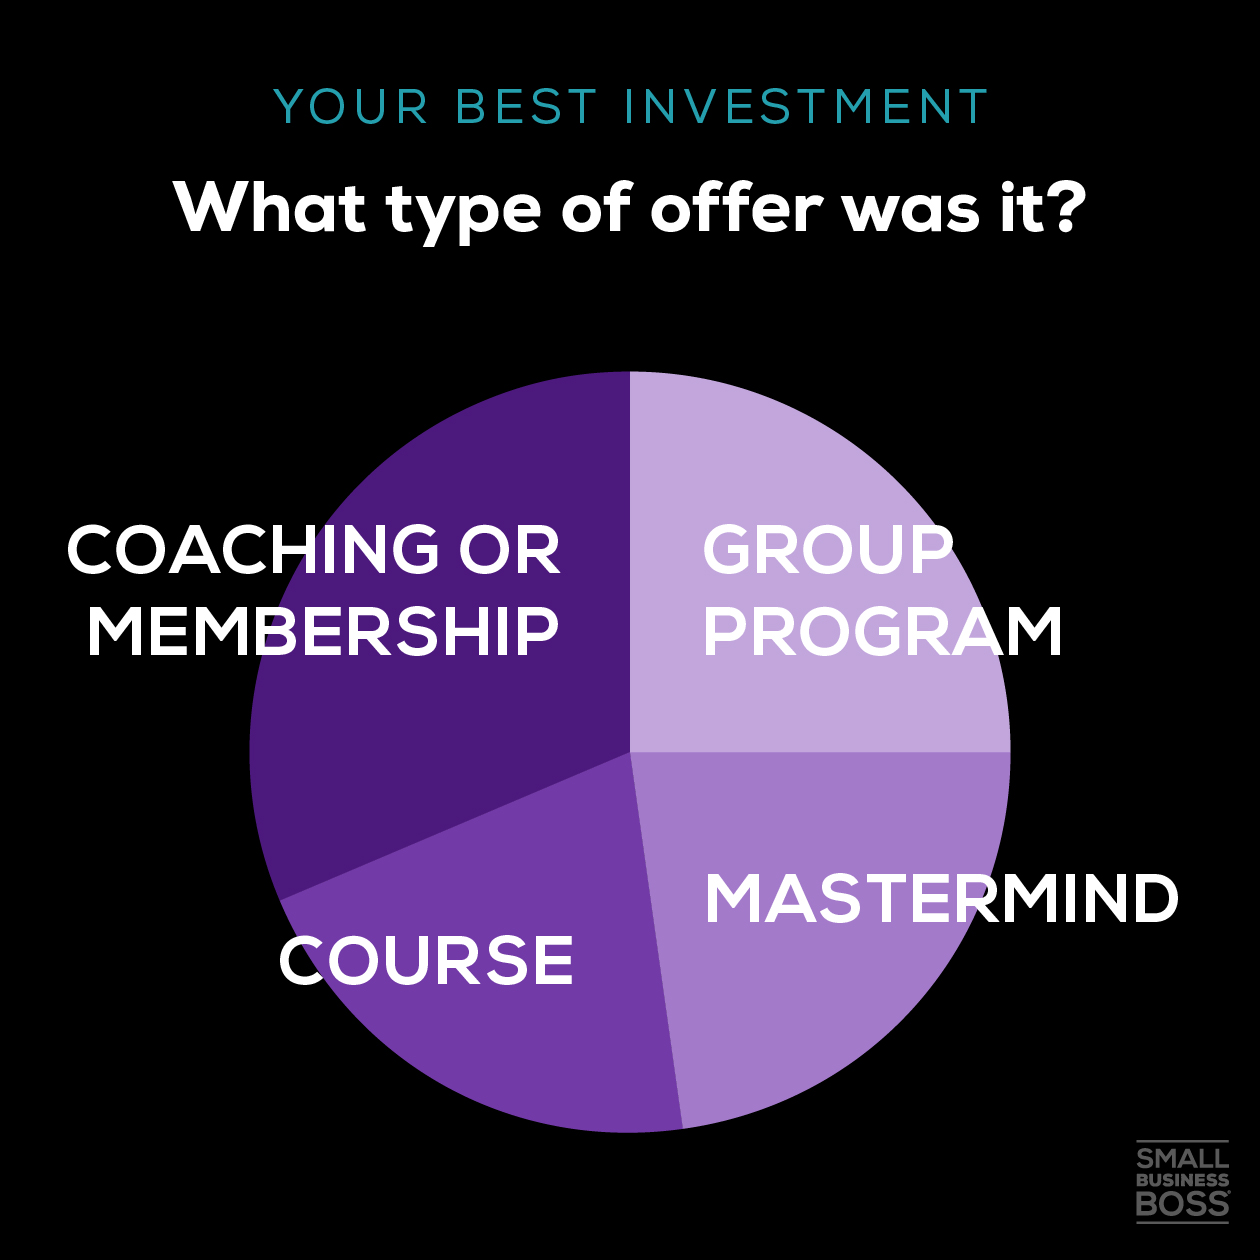 Best investment-what type